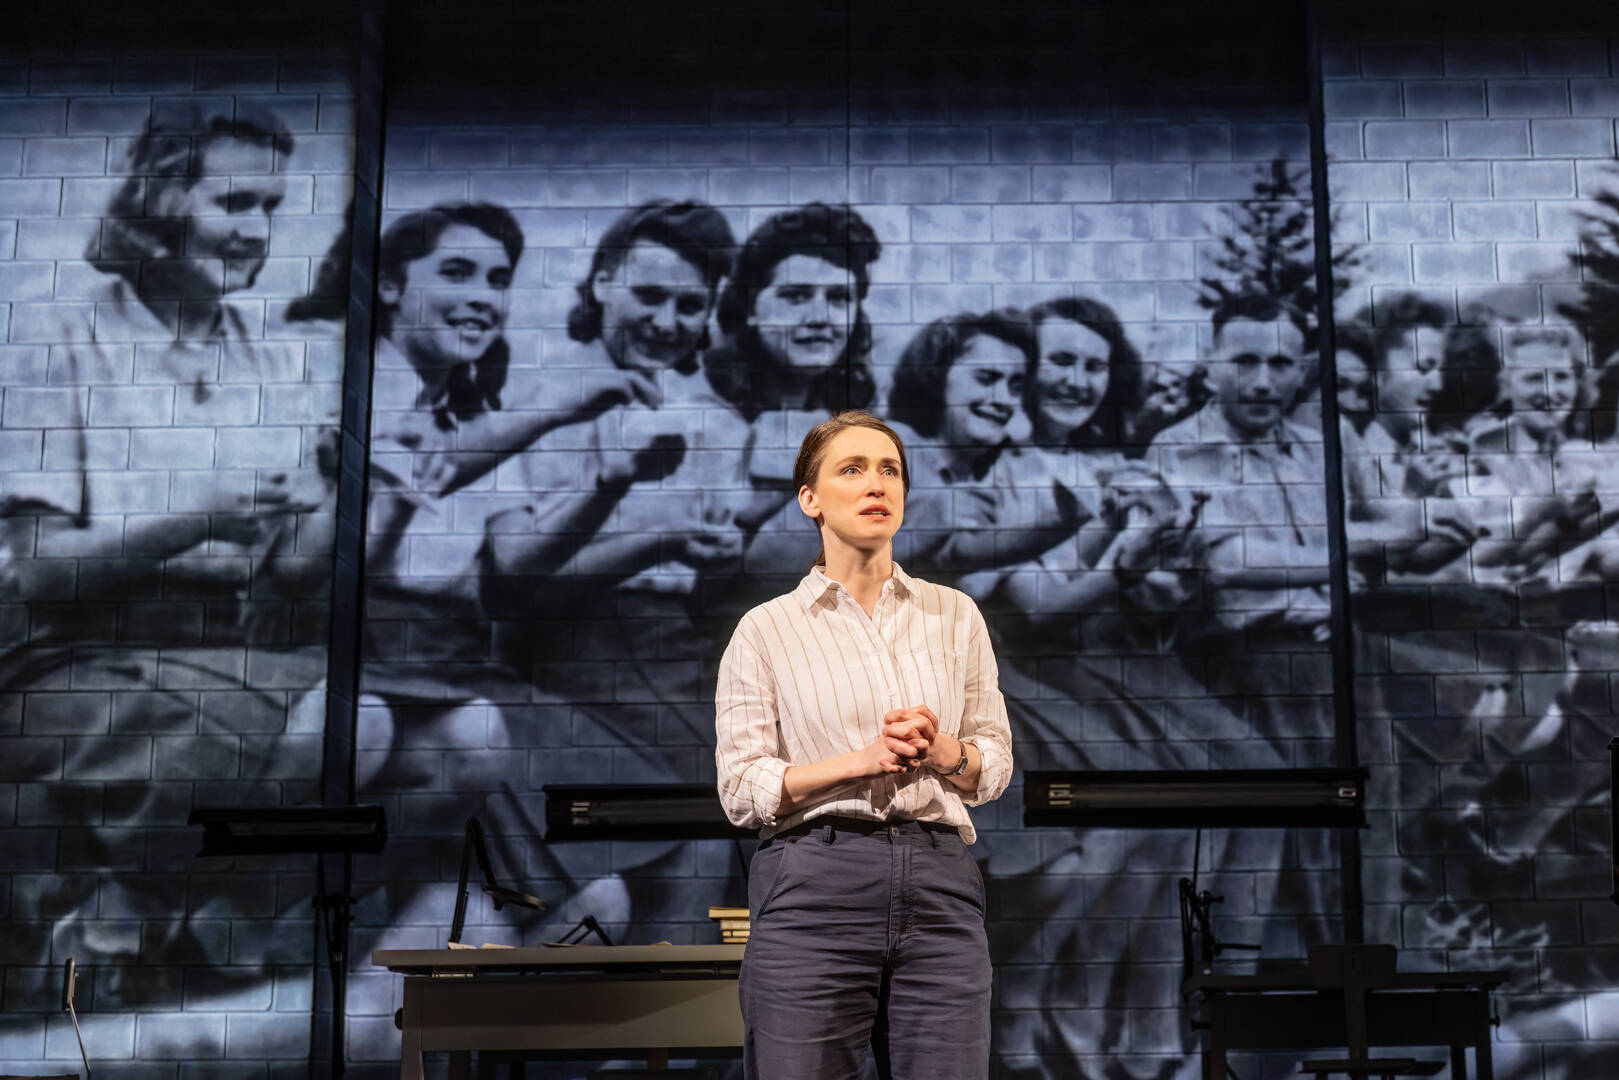 Elizabeth Stahlmann in ‘Here There Are Blueberries’ at New York Theatre Workshop (photo: Matthew Murphy)